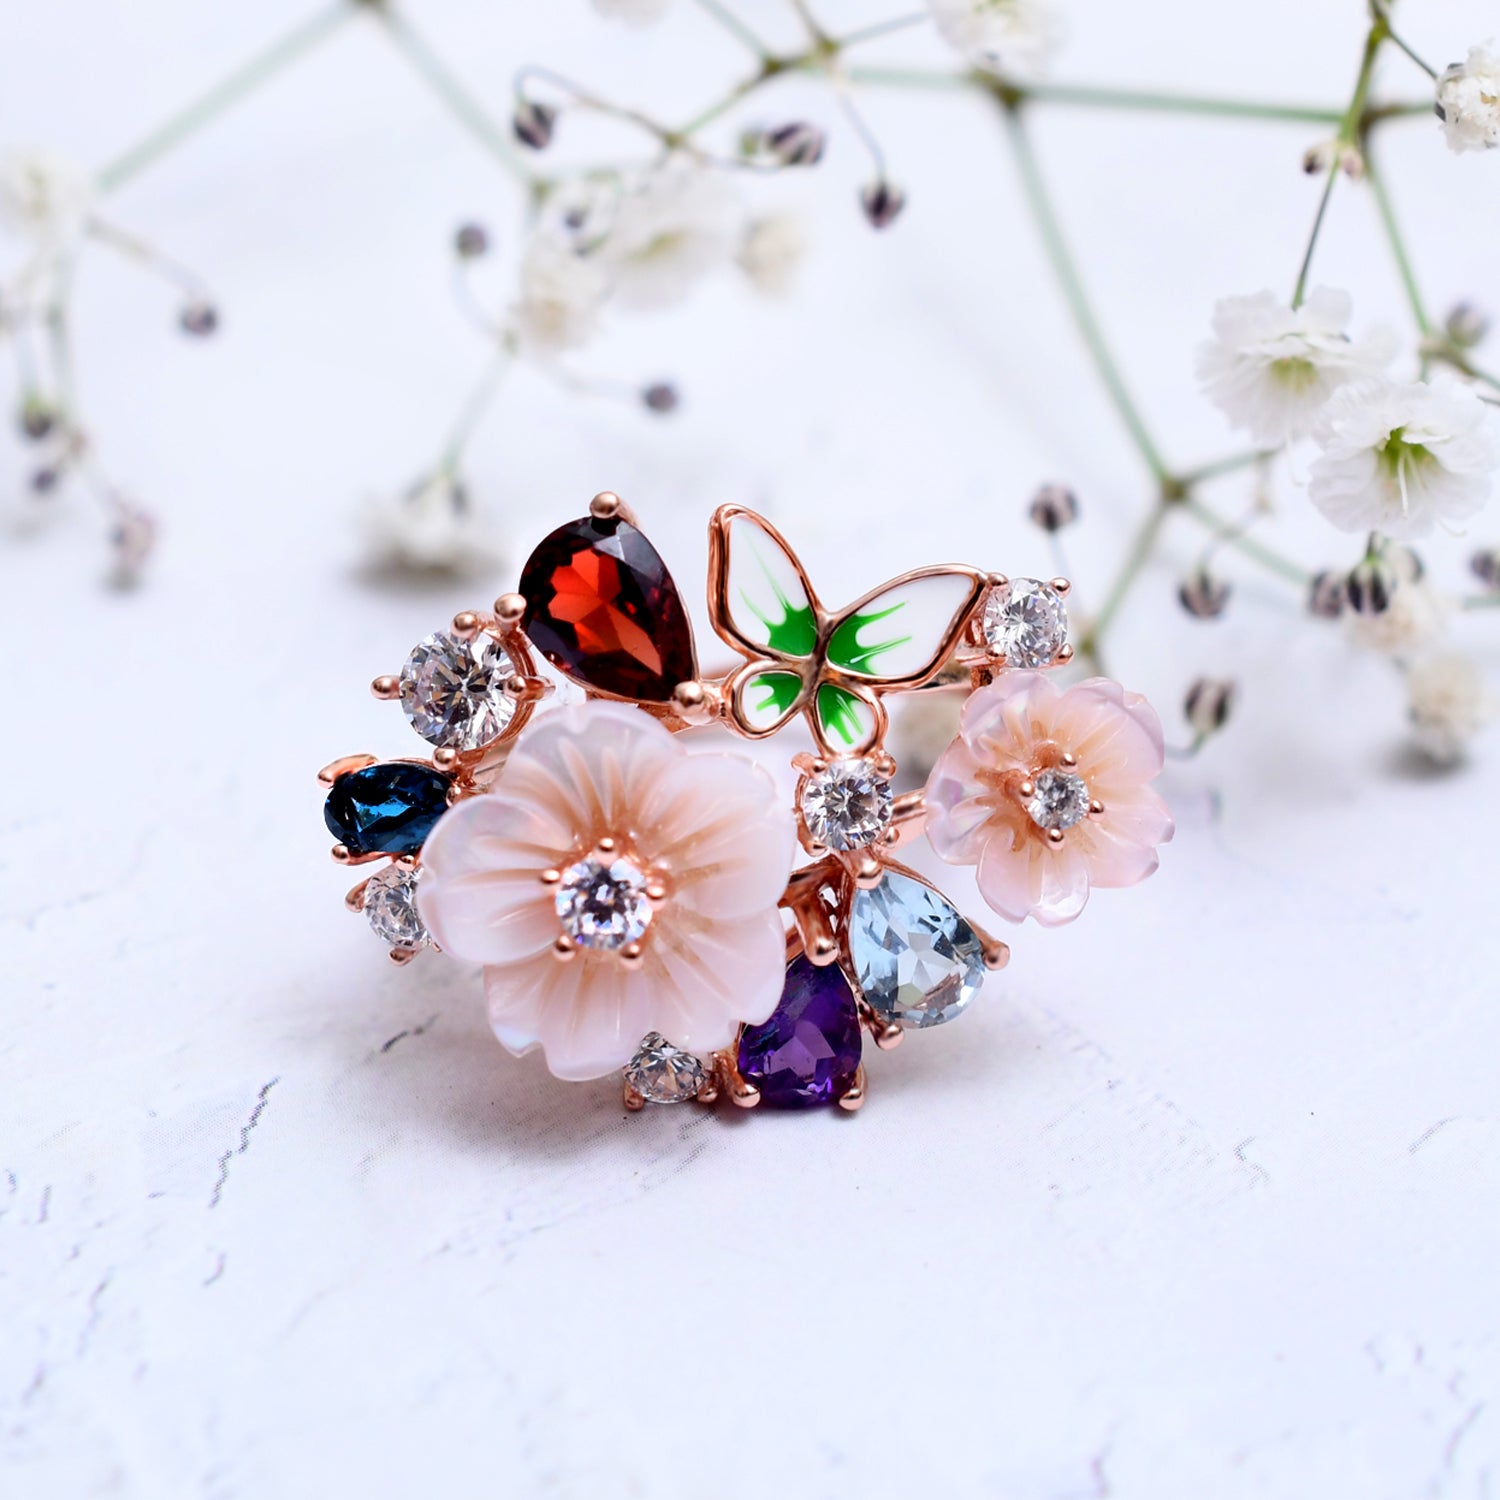 Silver Rose Gold Lush Butterfly & Floral Ring